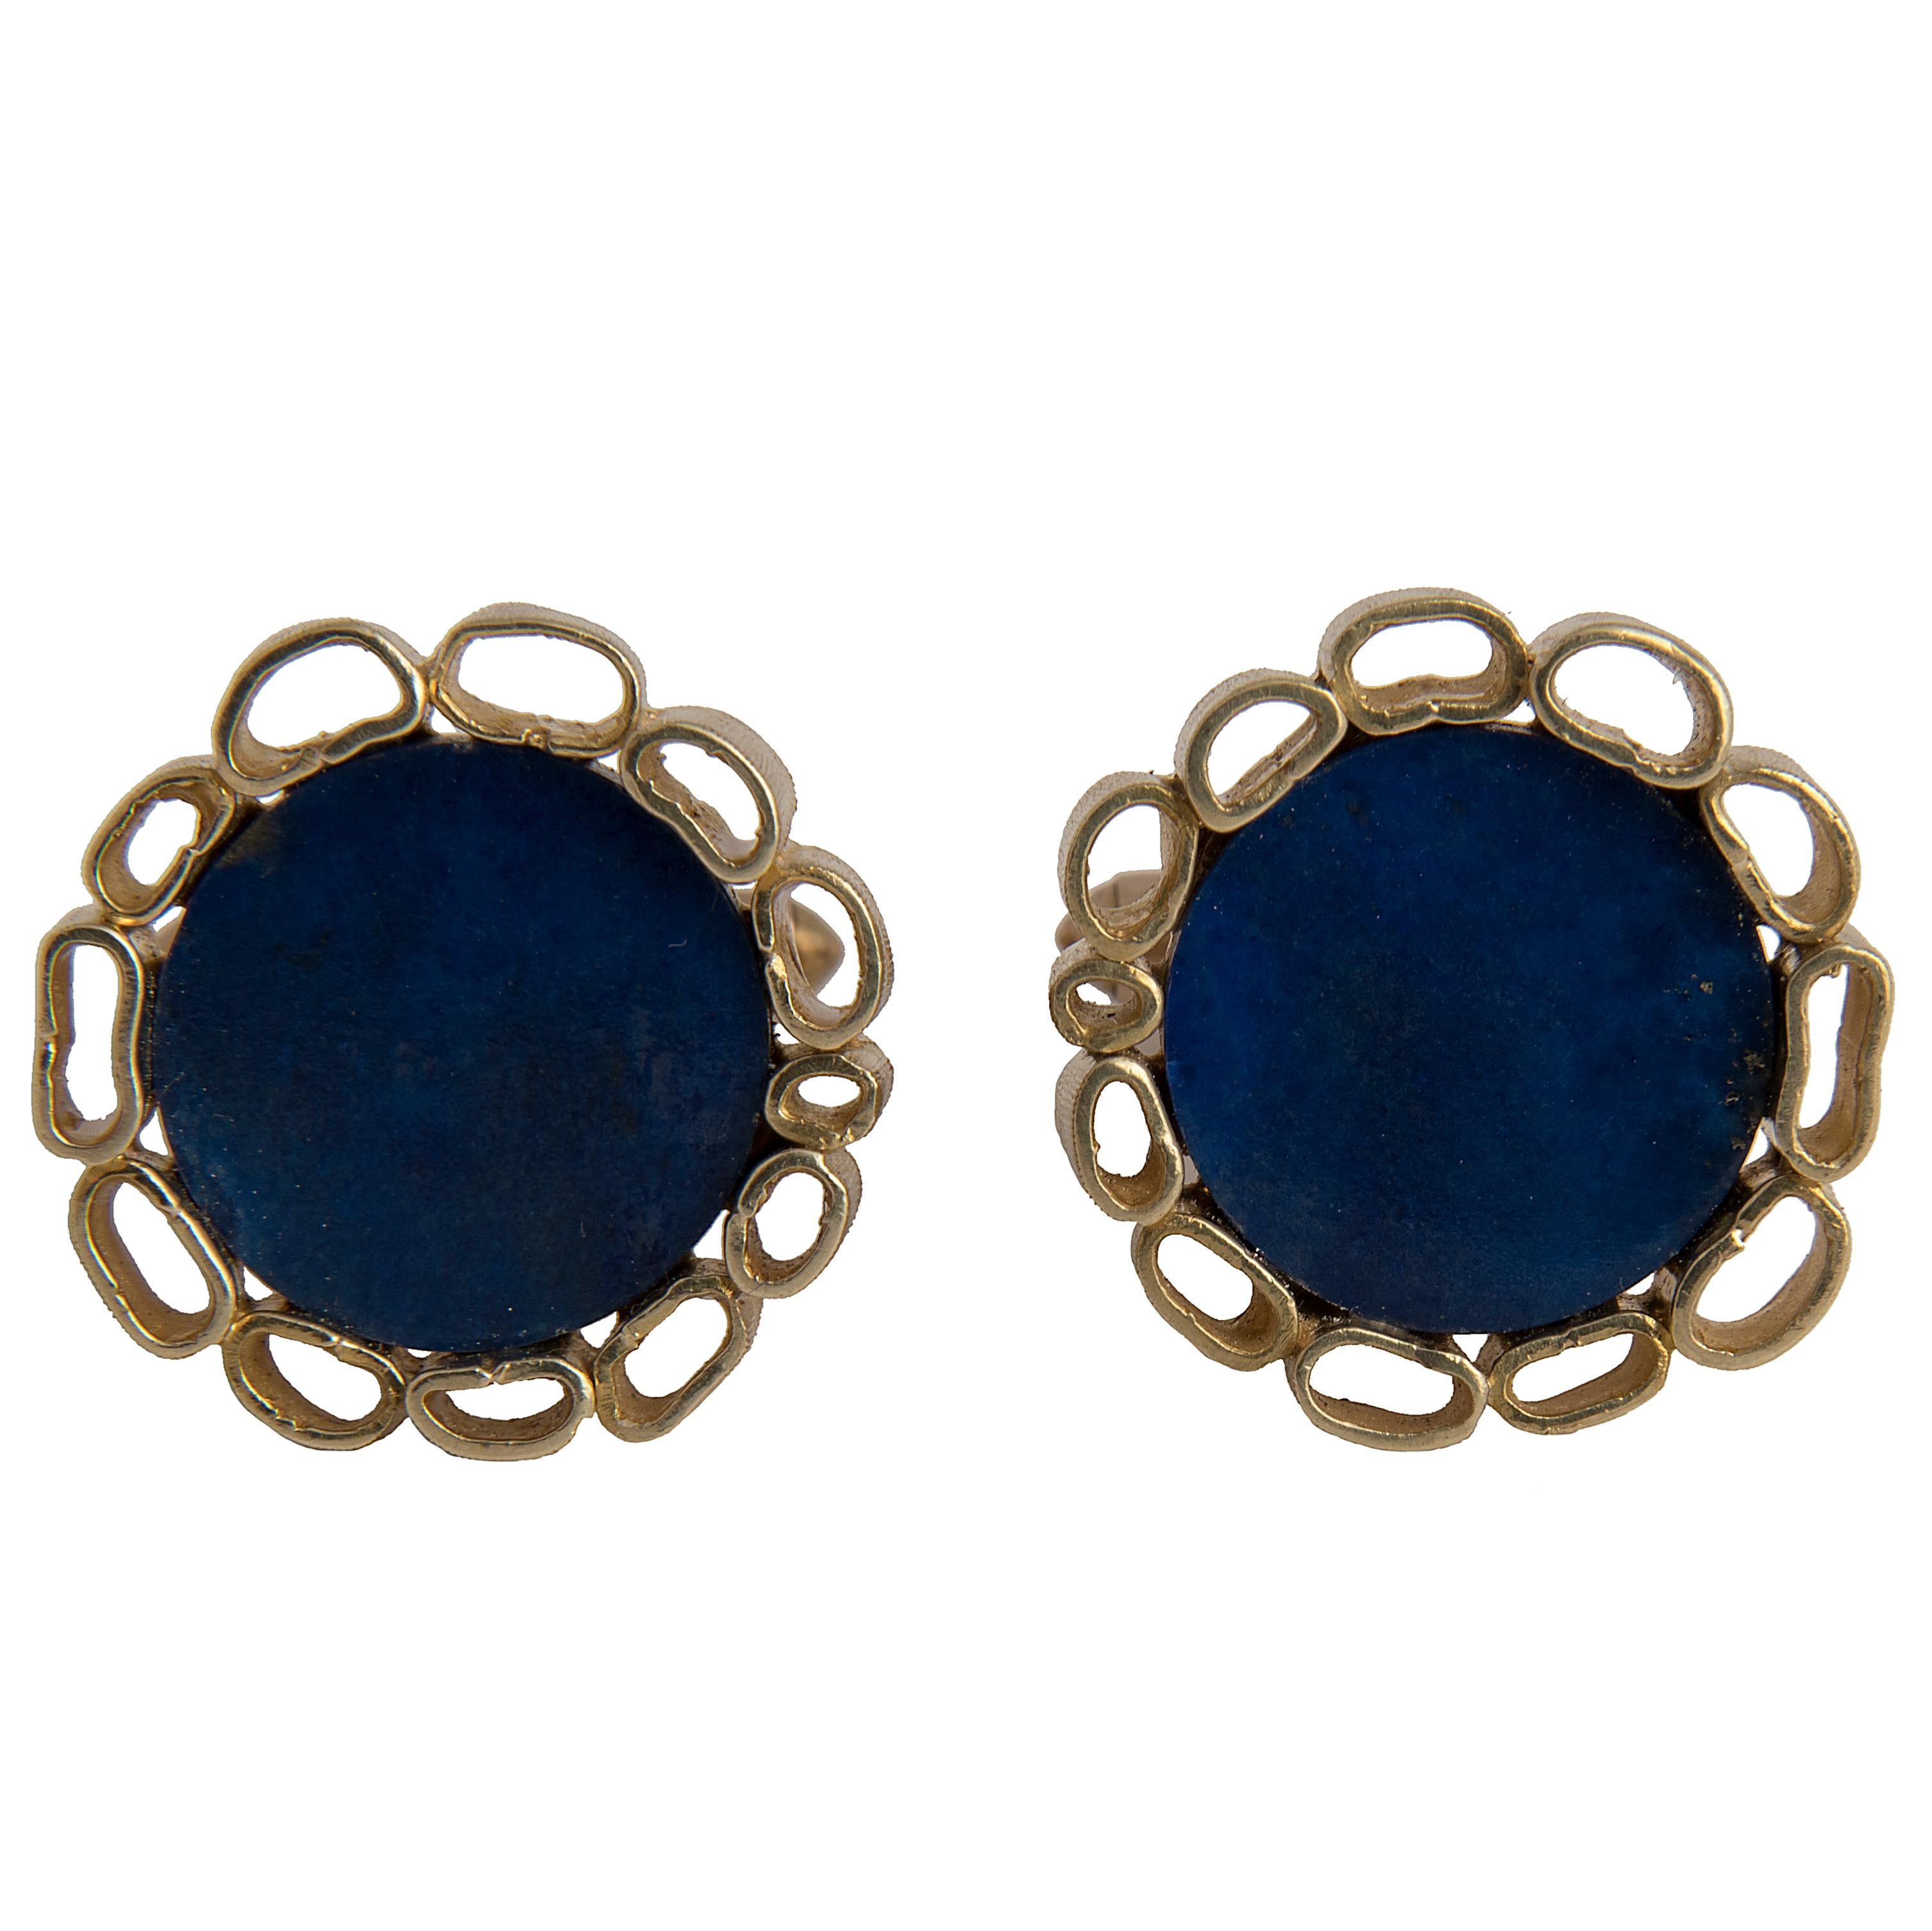 Pair of Cufflinks, textured 18kt yellow gold and lapis lazuli
Marked 18k
Italy, 1970s
